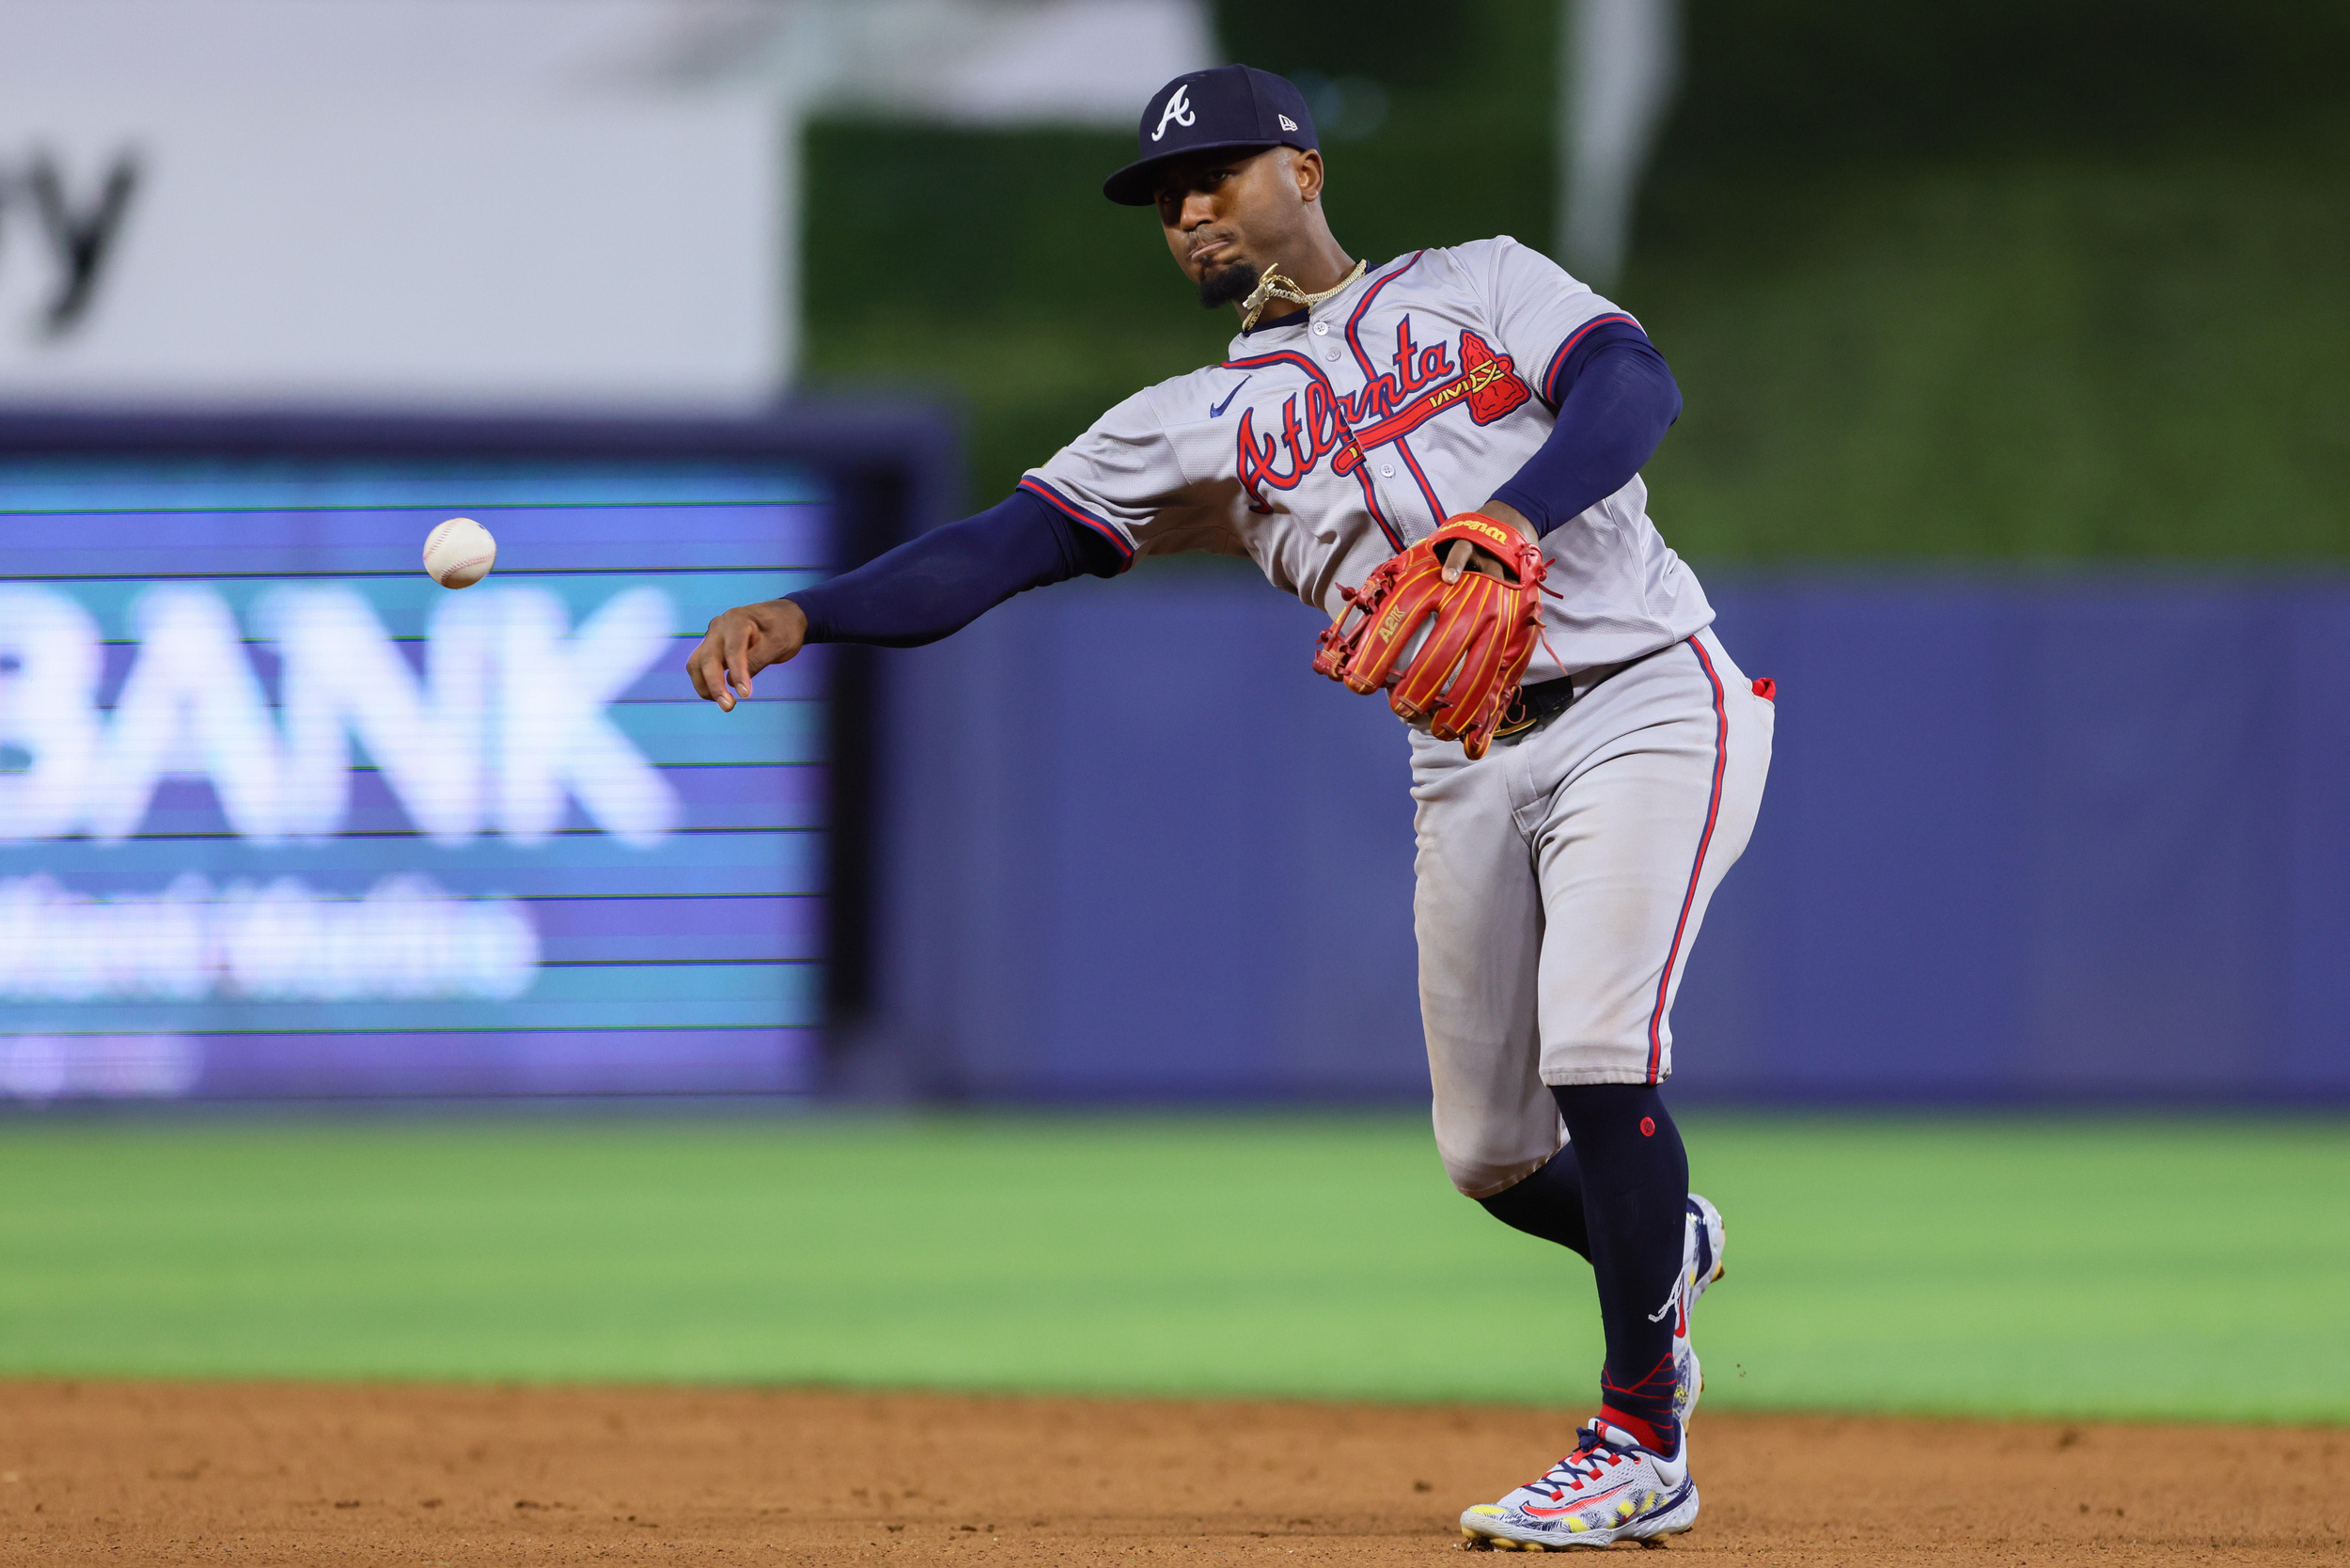 Positive injury updates on Sean Murphy and Ozzie Albies